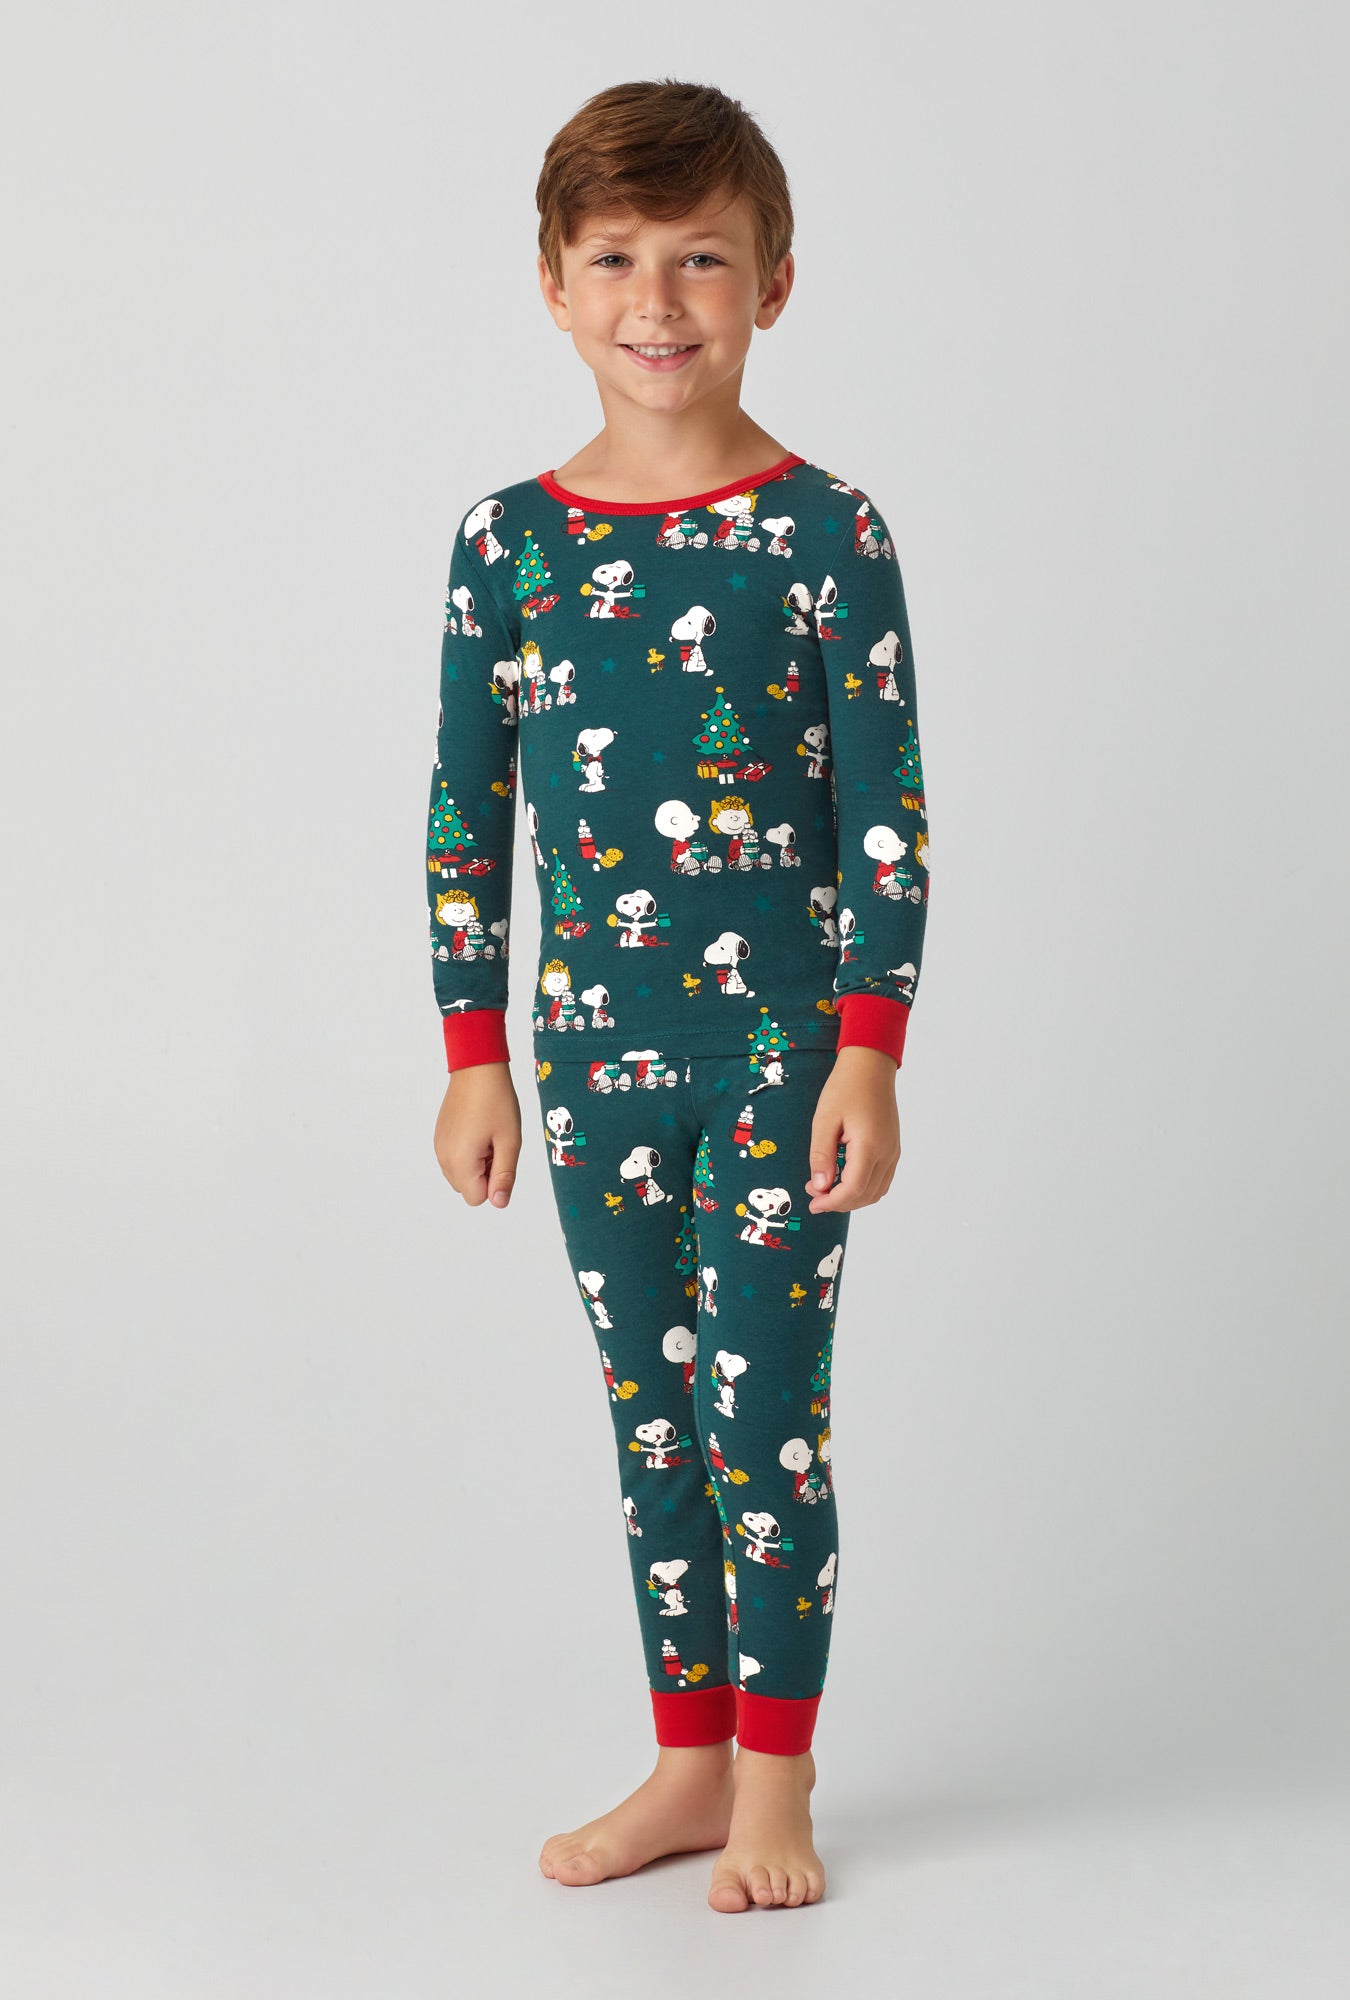 A kids wearing Long Sleeve Stretch Jersey Kids PJ Set with Snoopy's Cocoa  print